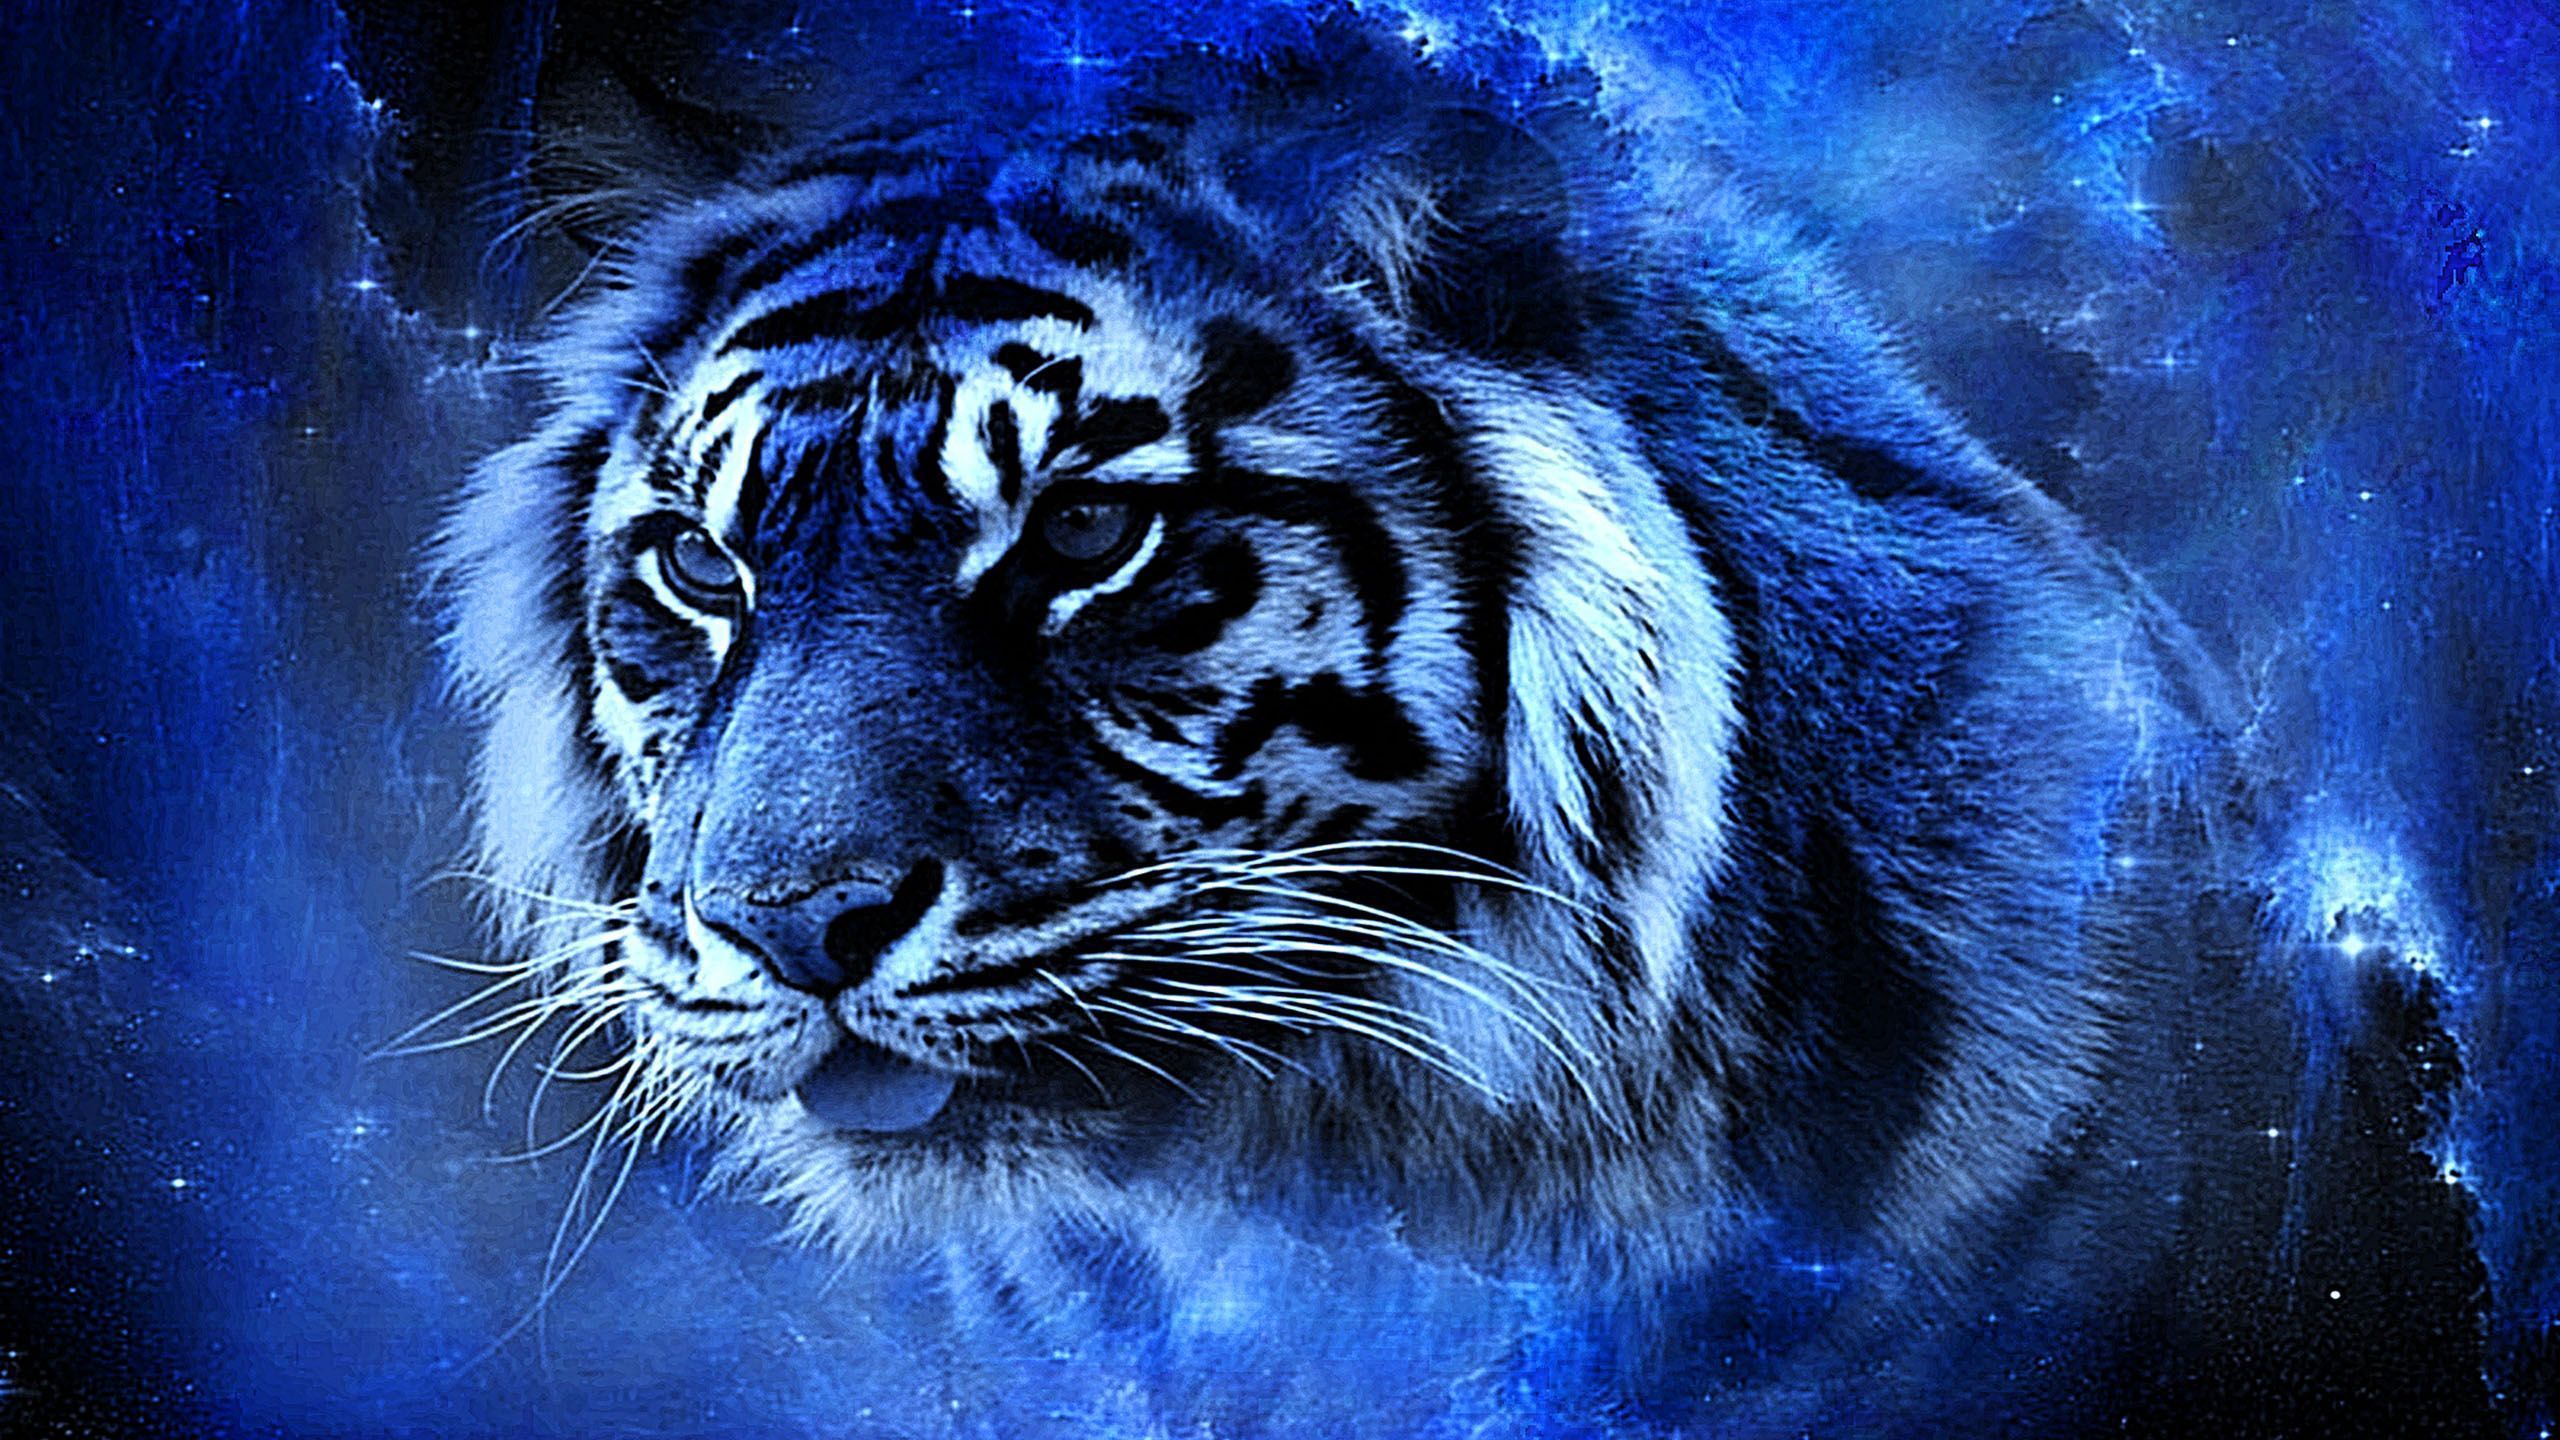 White Tiger Wallpaper Gallery Pic Wpw401577 Data Zoo